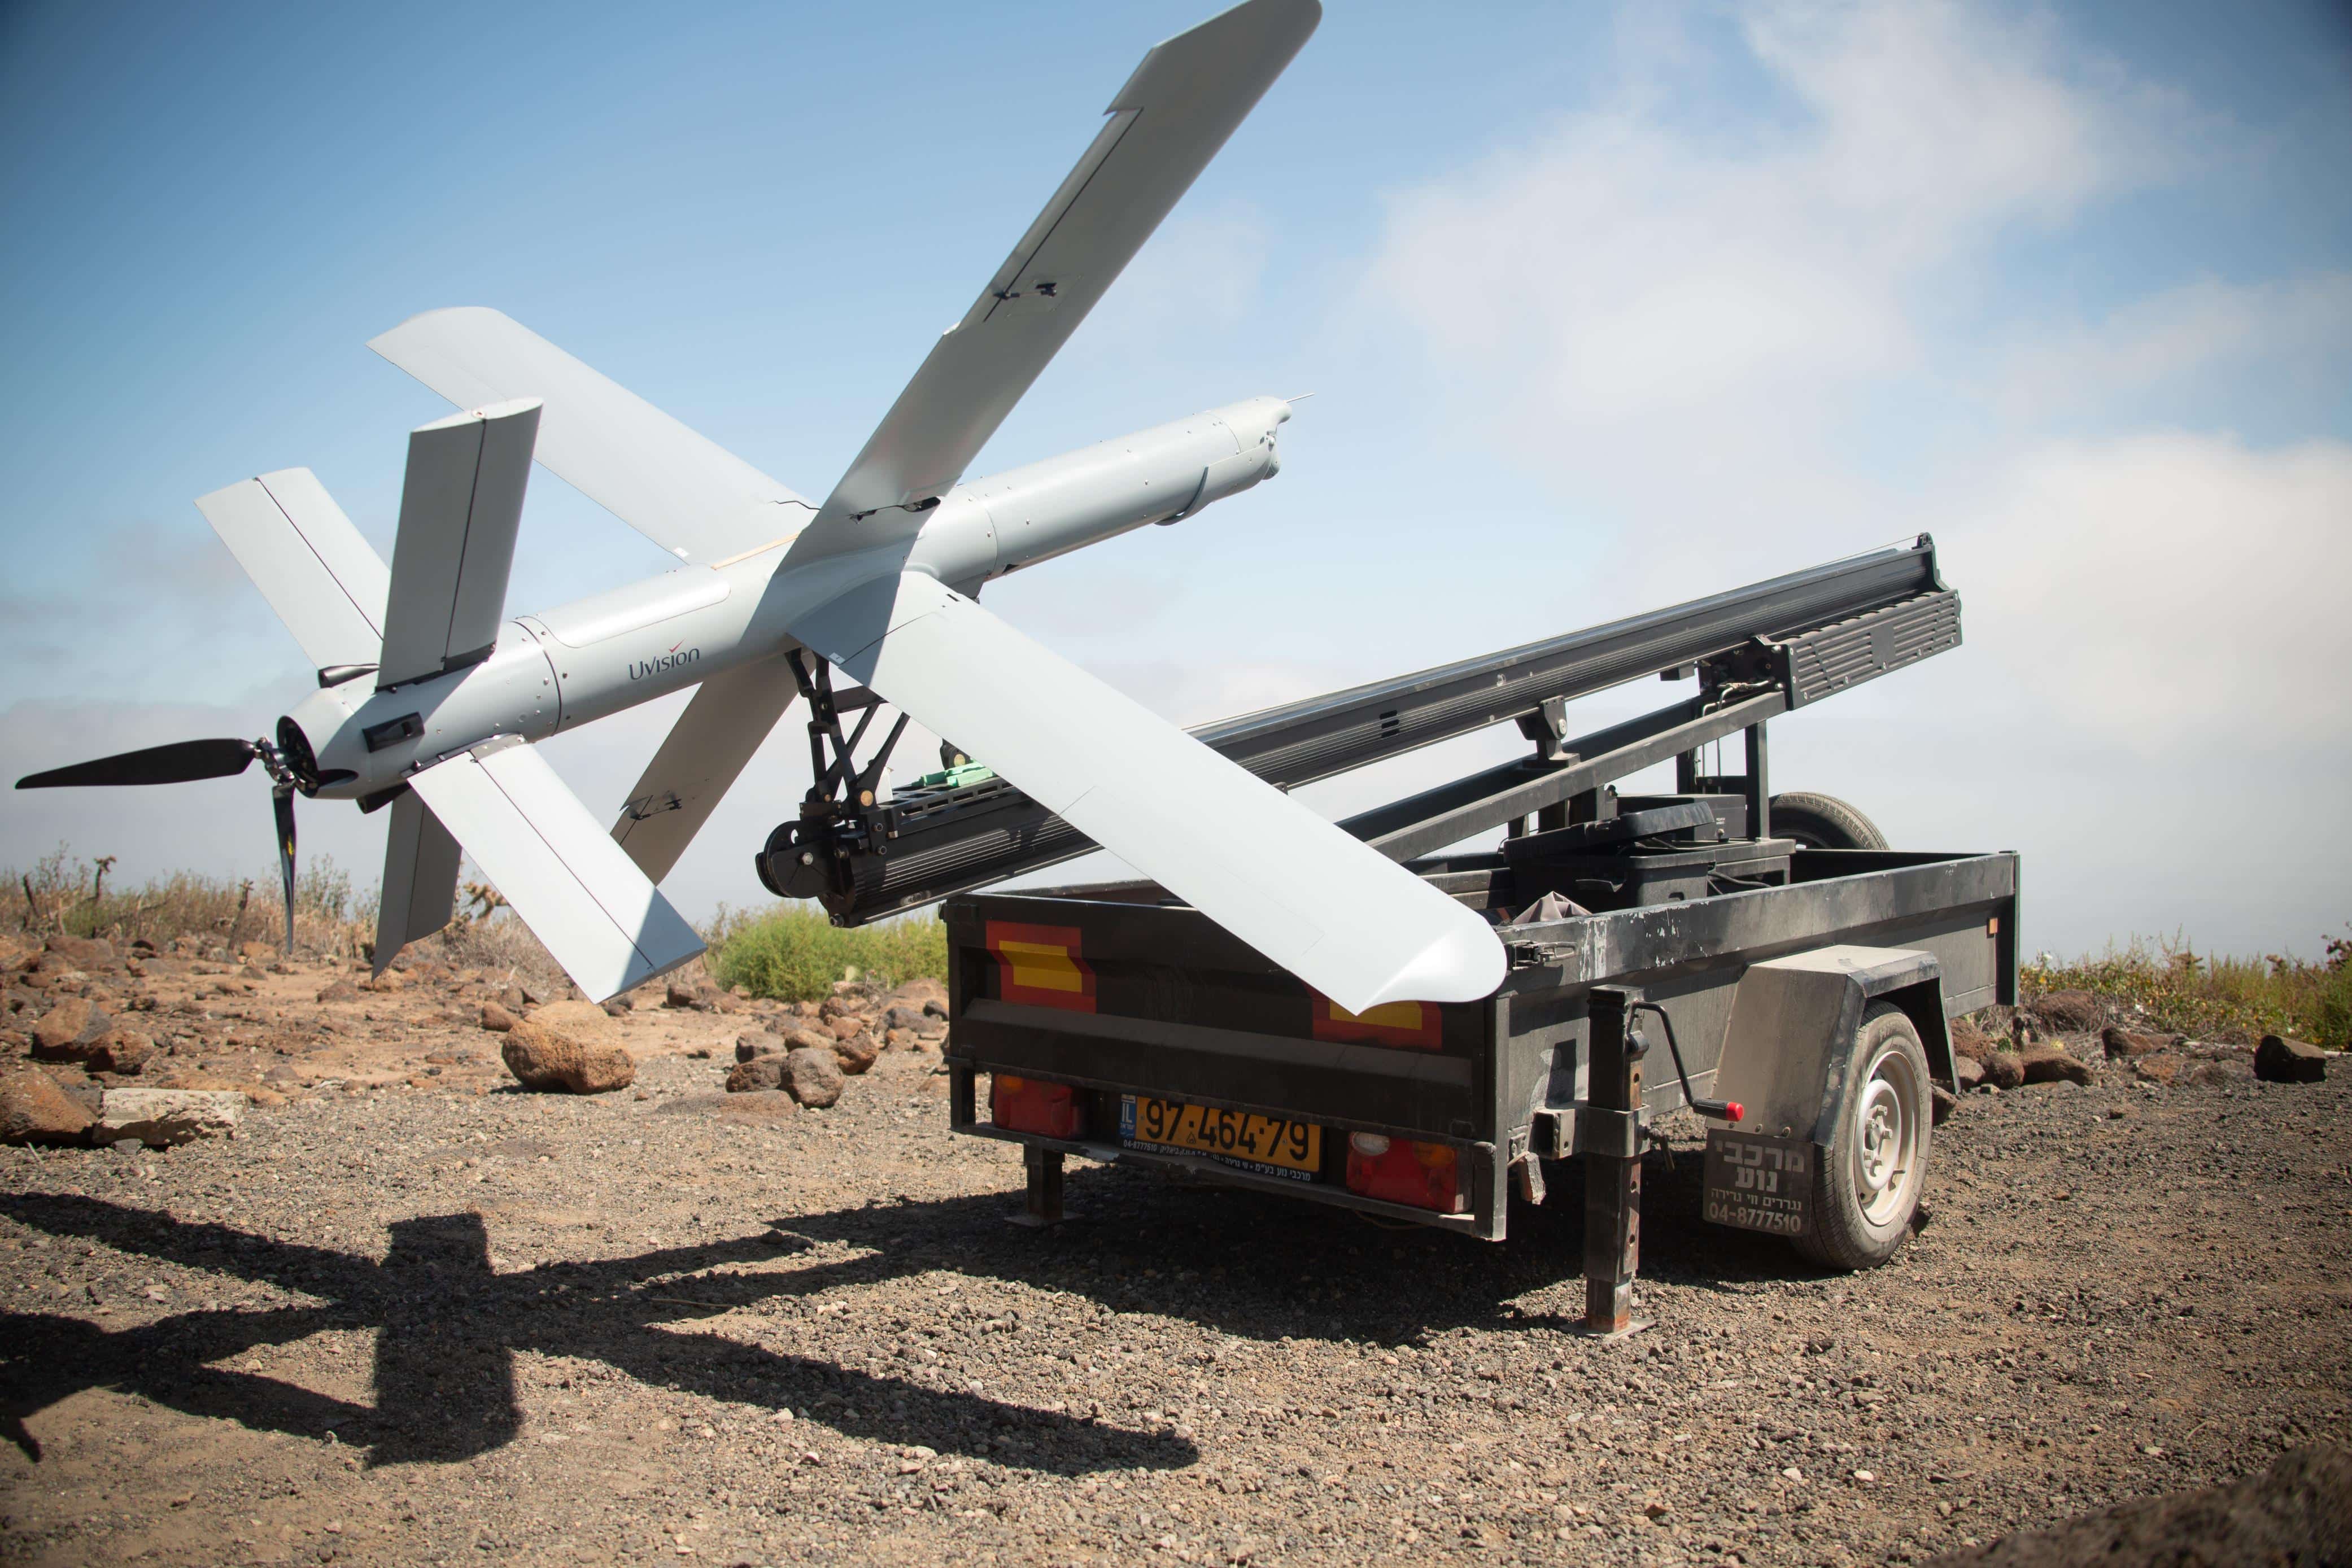 A U.S. Marine Corps Hero-400 loitering munition drone is staged before flight on San Clemente Island, California, May 25, 2022. The Hero-400 is a loitering munition that the United States Marine Corps and other Department of Defense entities are beginning to incorporate into specific mission sets. This initial training flight develops the unmanned aerial systems pilots’ confidence and abilities to be able to operate the Hero-400 in any clime and place, and enabling 3rd MAW to remain a more lethal and ready force. (U.S. Marine Corps photo by Lance Cpl. Daniel Childs)